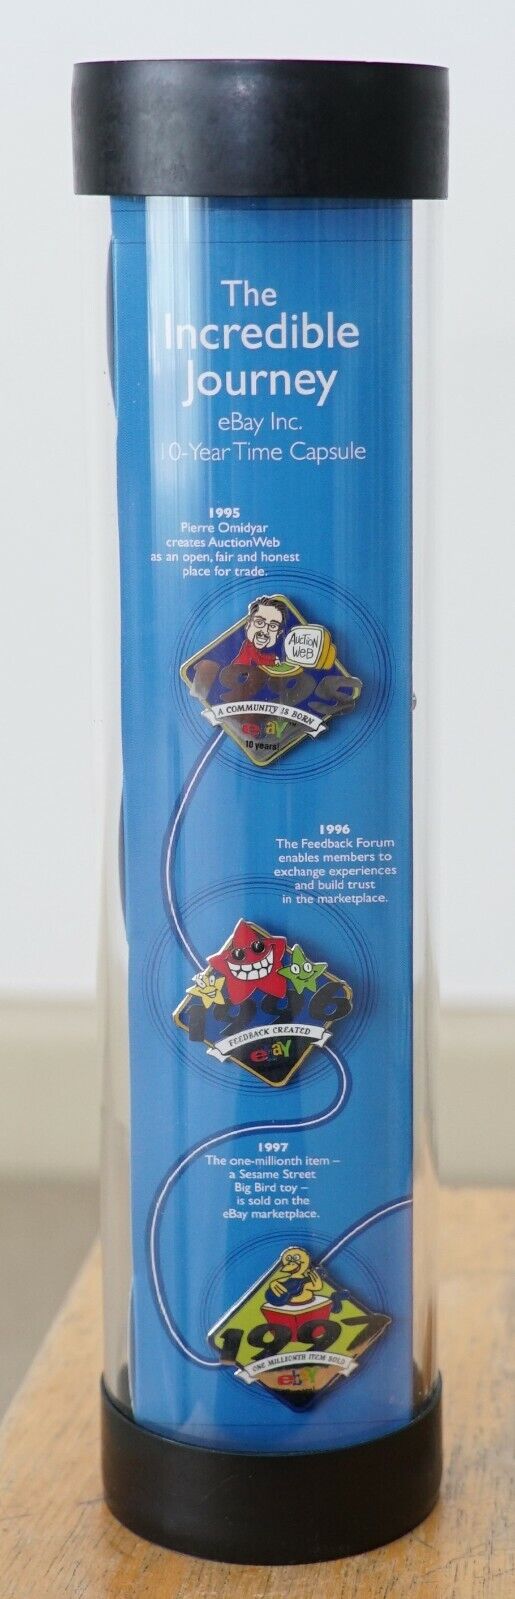 eBay Live 2005 Collectible Pins 11 the Incredible Journey 10 Year Anniversary